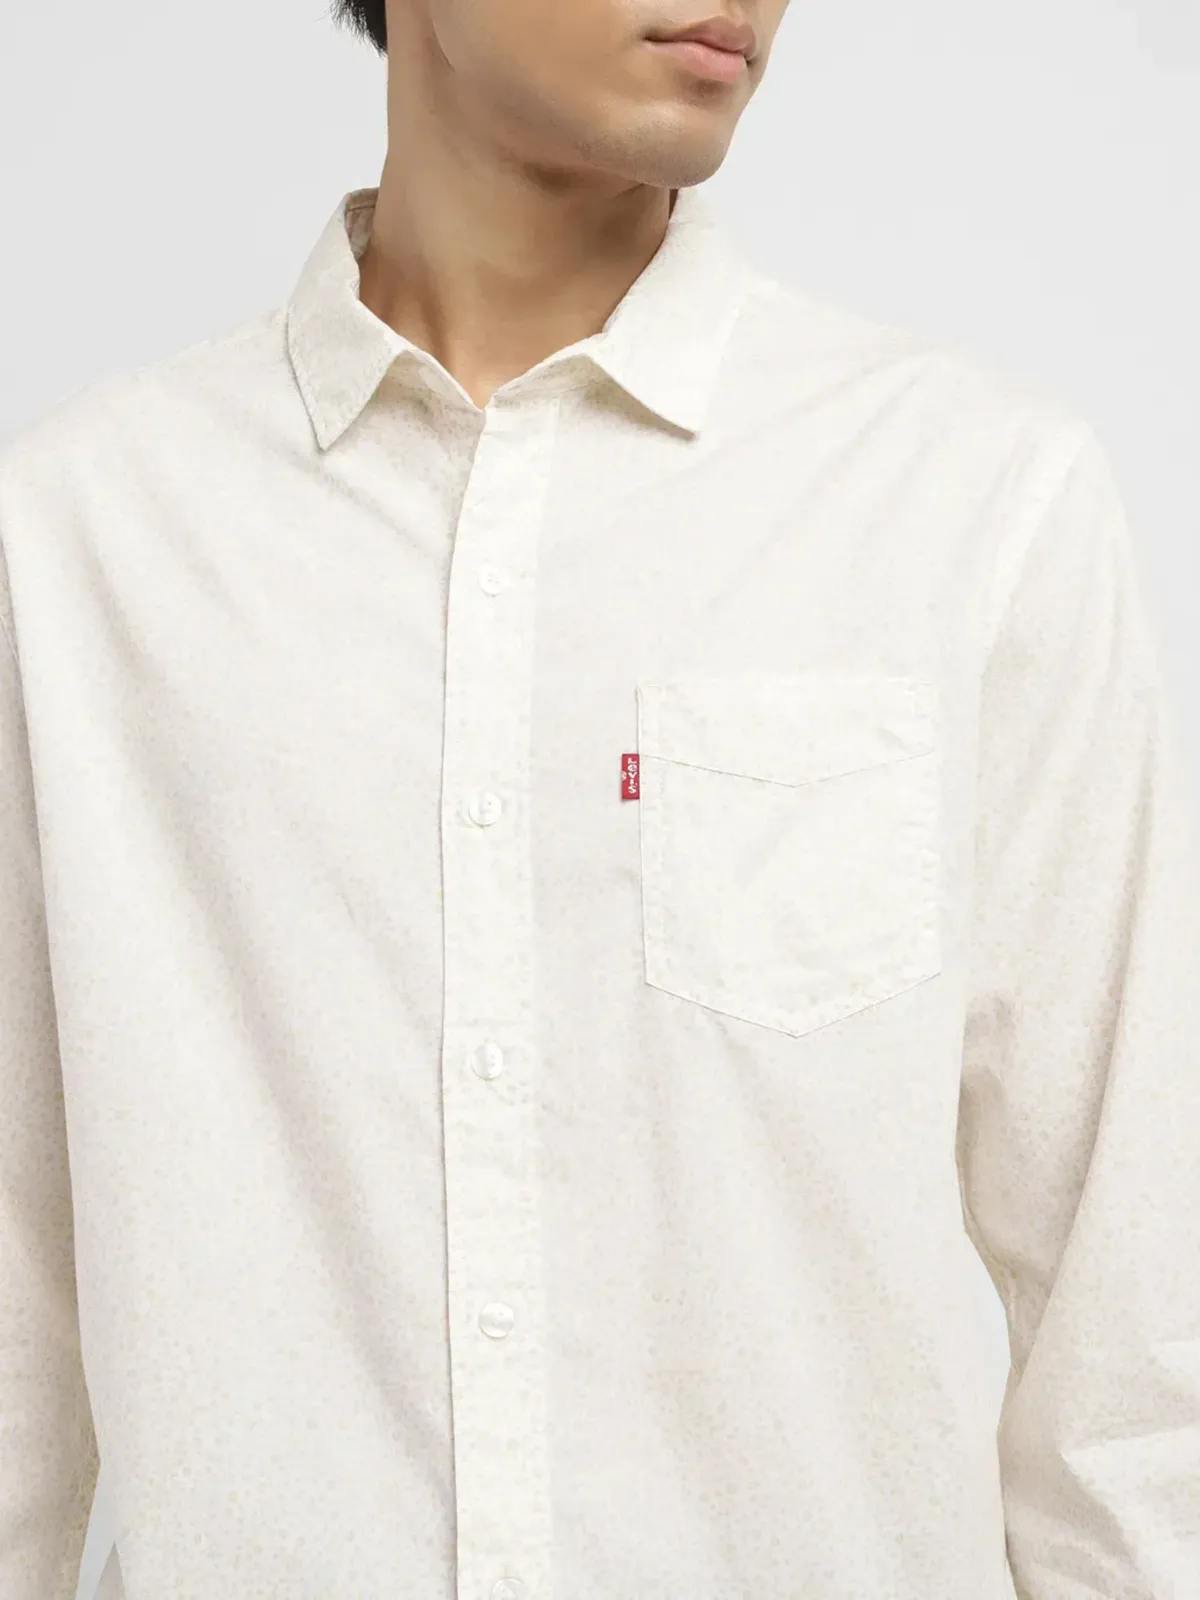 Levis off white floral printed shirt